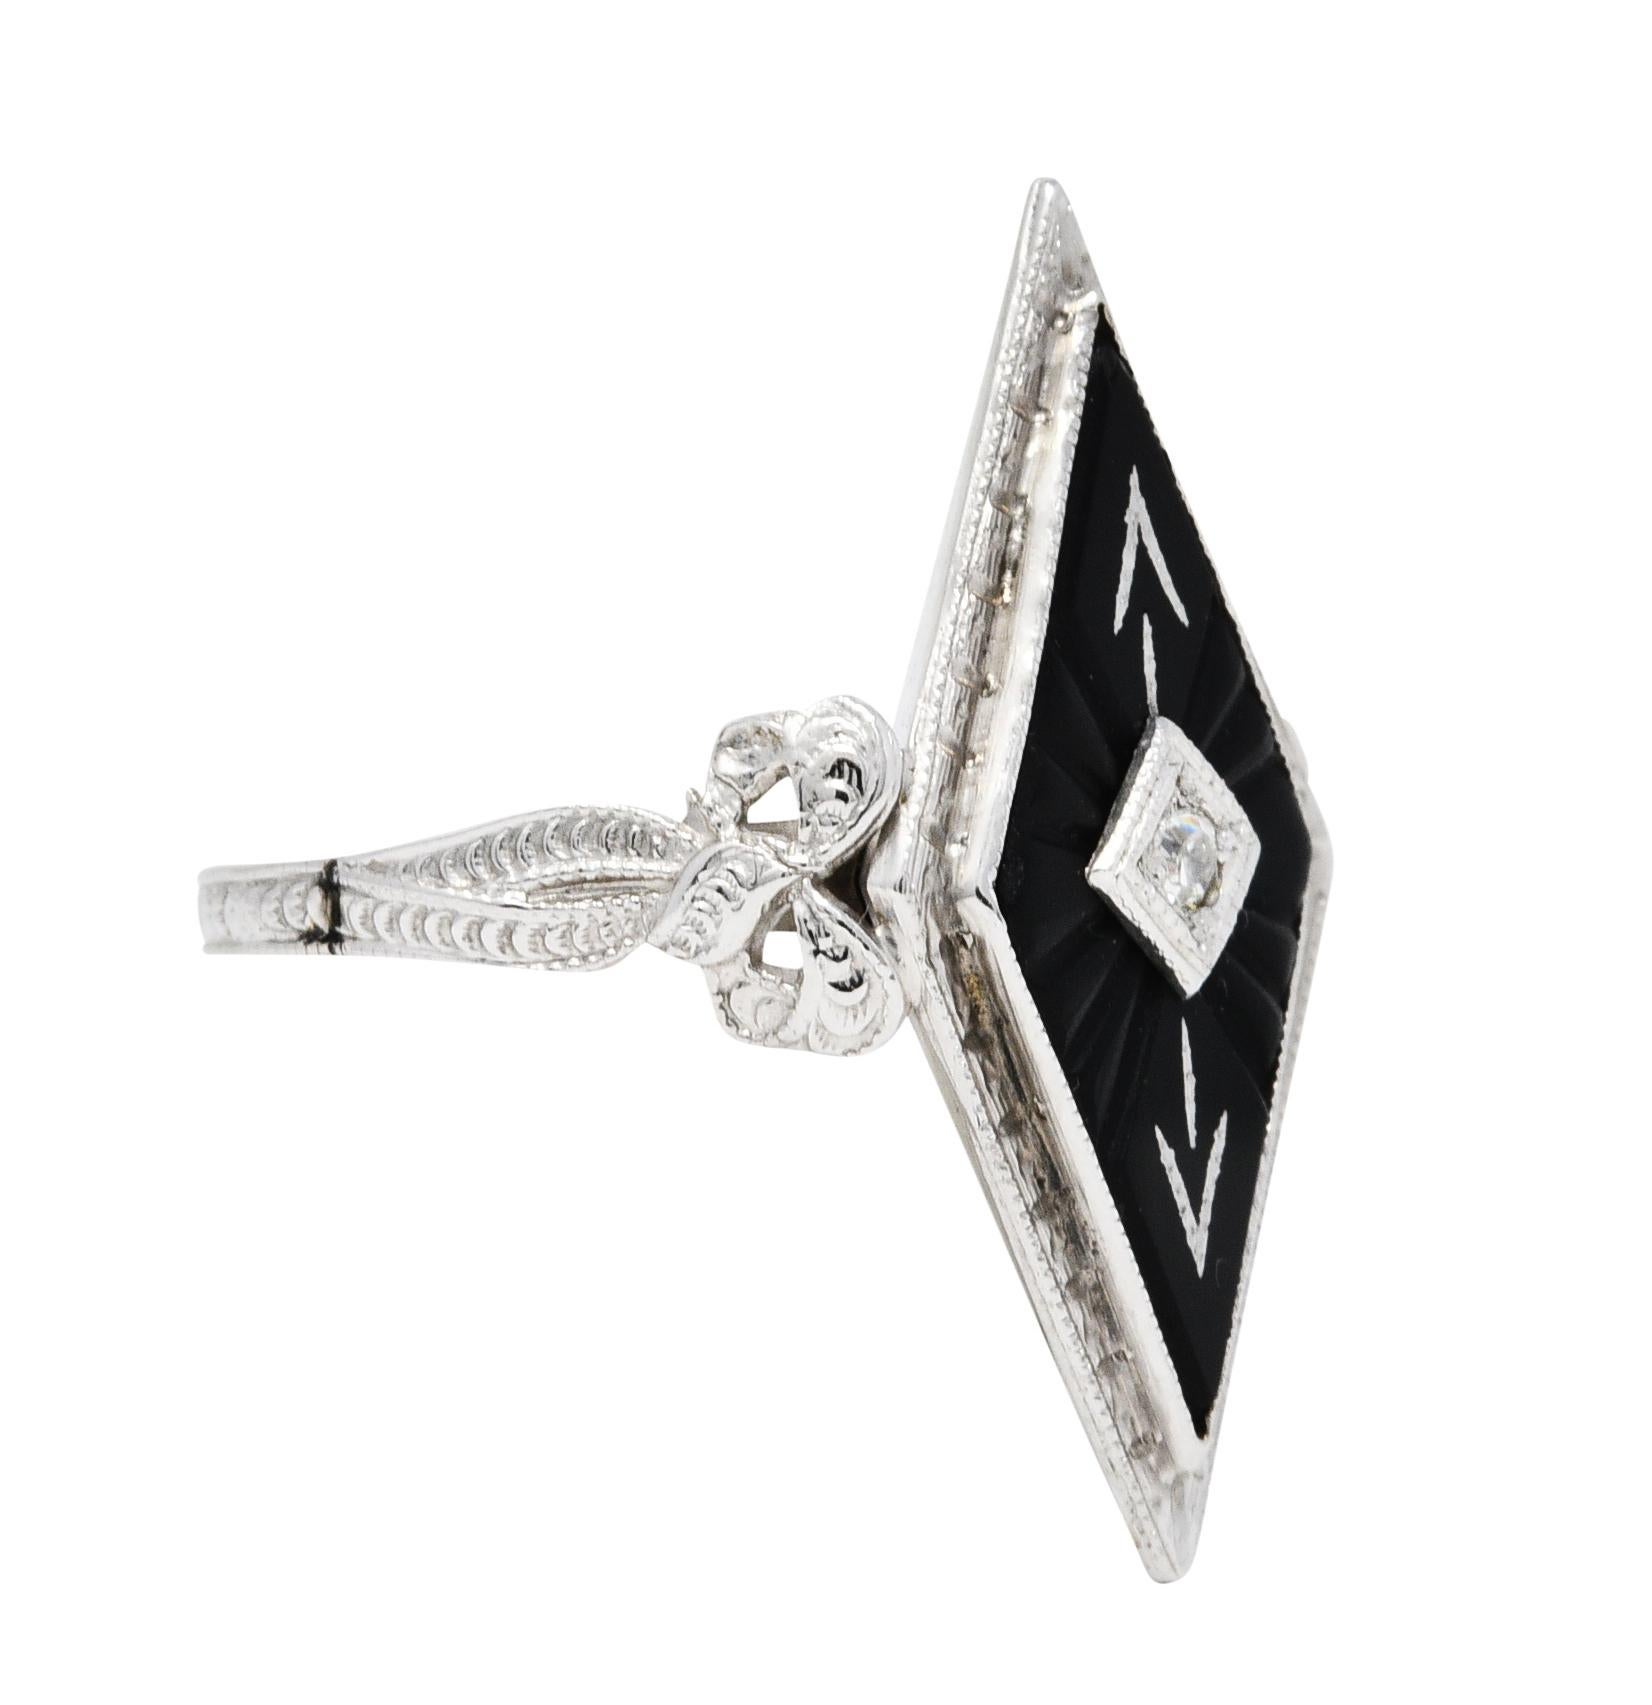 Navette shaped dinner ring centers an old single cut diamond weighing approximately 0.03 carat

Inset in a white gold square form head with an onyx surround

Deeply carved with a radiated burst motif and stylized arrows accented by white gold